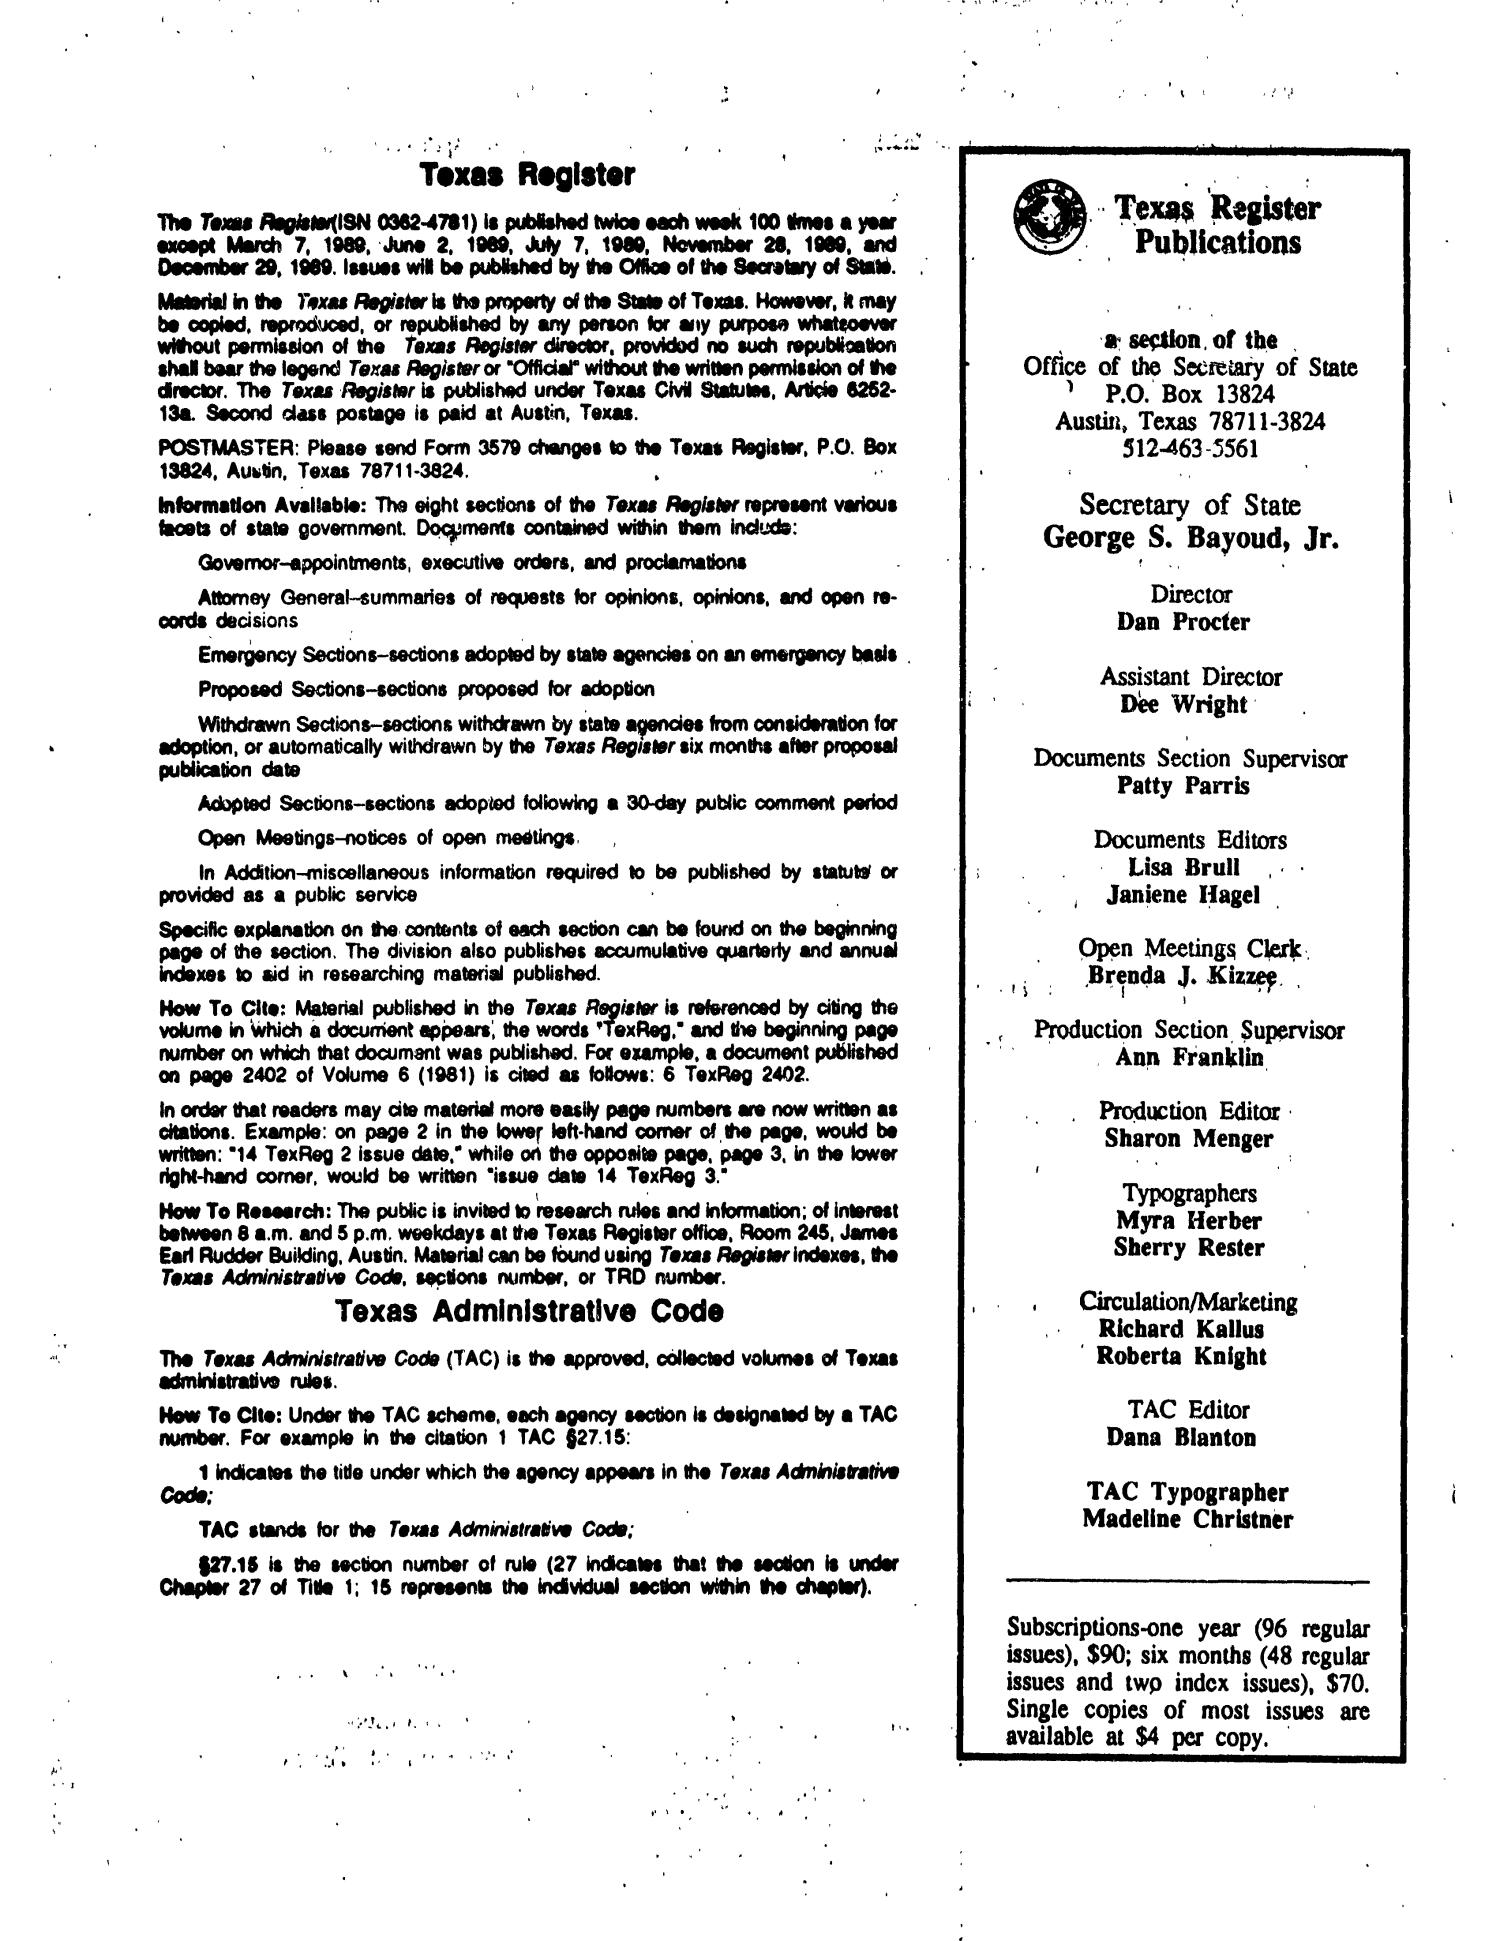 Texas Register, Volume 14, Number [94], Pages 6691-6812, December 22, 1989
                                                
                                                    None
                                                